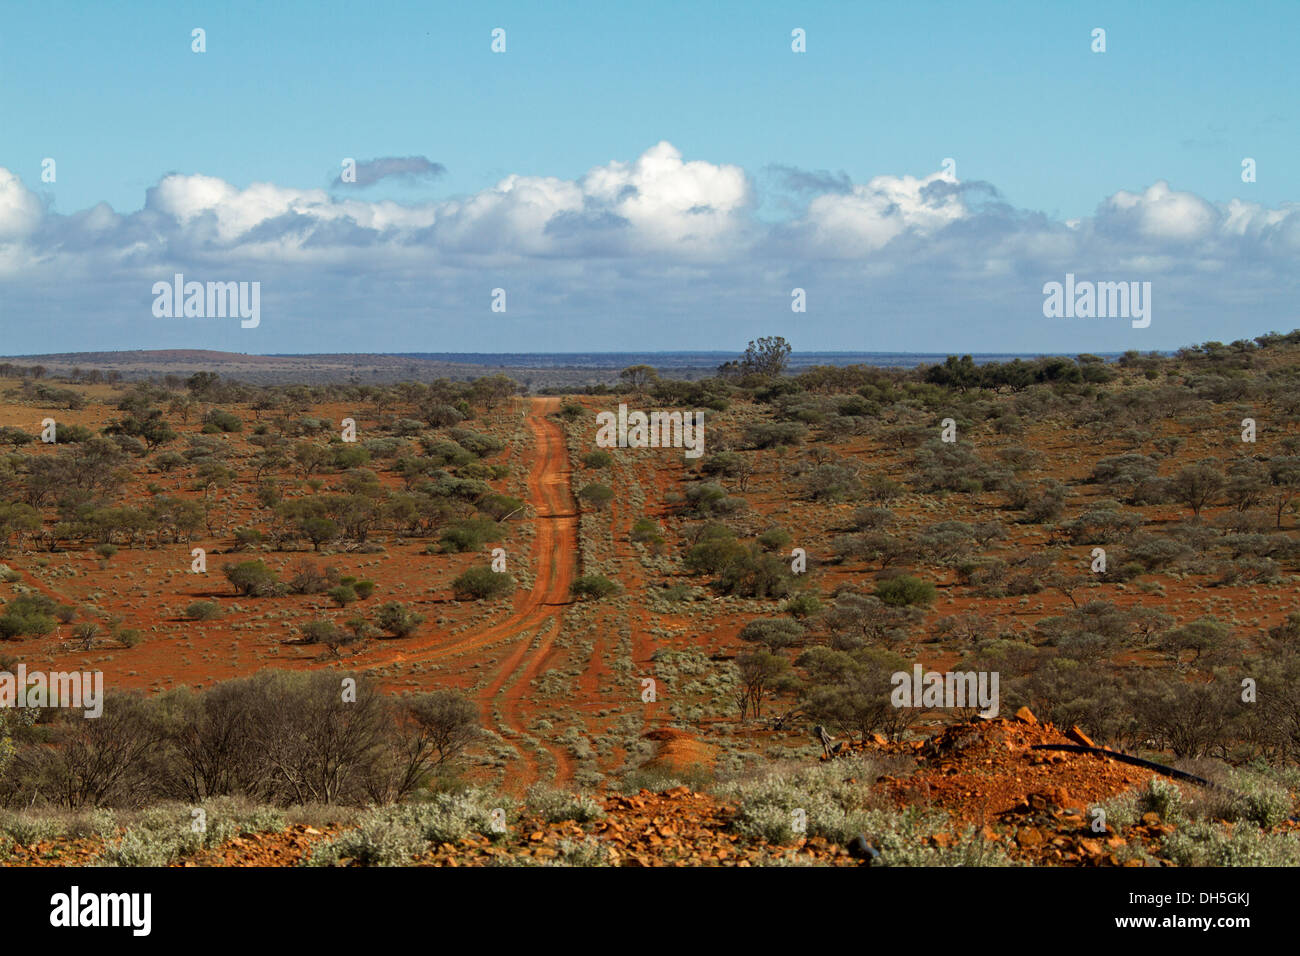 View of vast outback landscape with red road leading across plains with low vegetation from hill to distant horizon and blue sky in South Australia Stock Photo